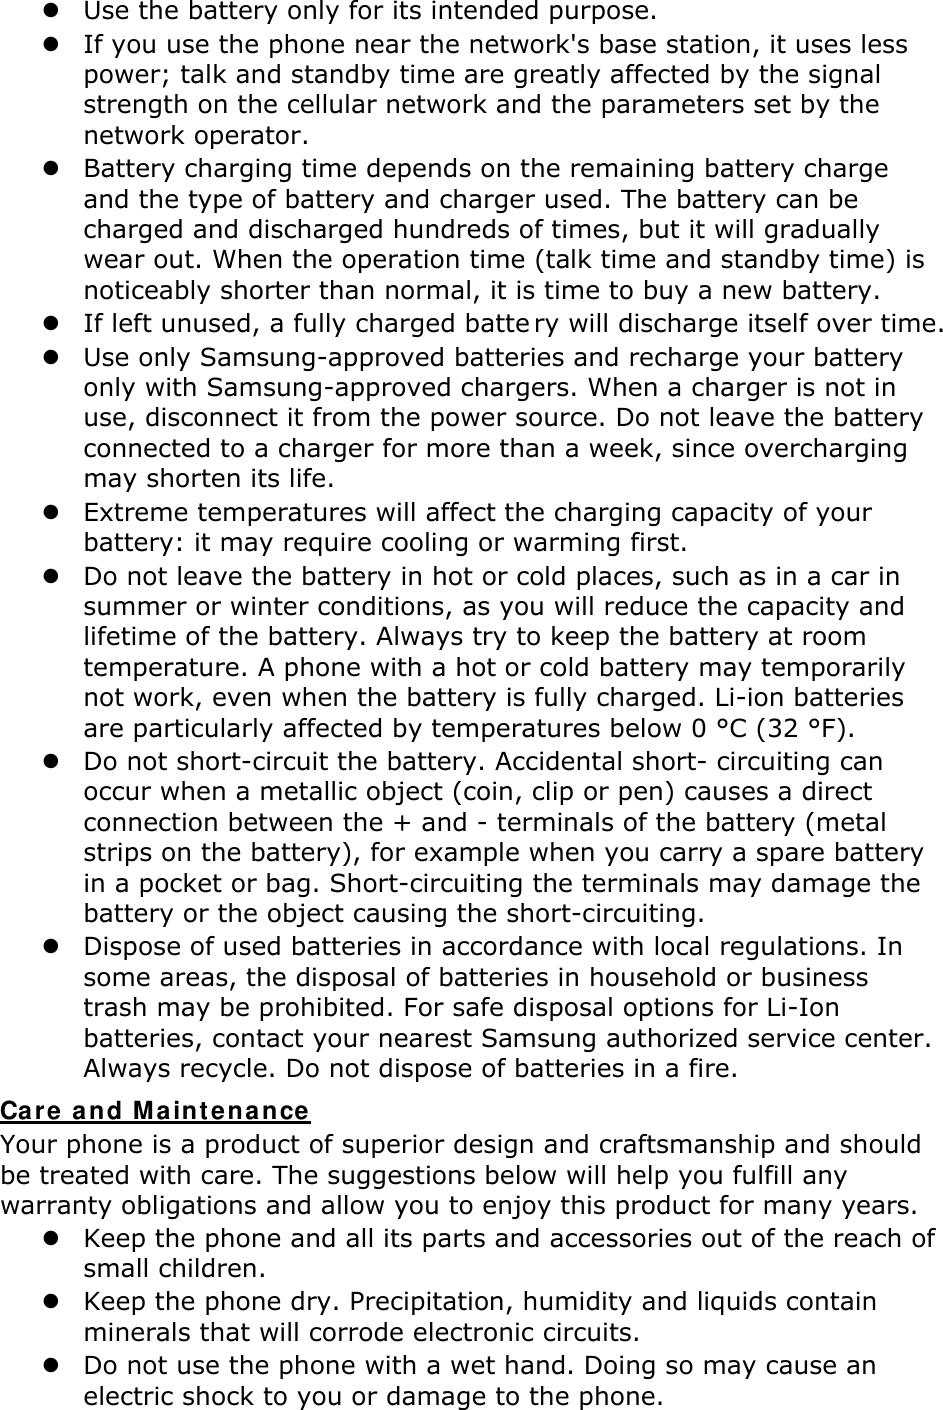  Use the battery only for its intended purpose.  If you use the phone near the network&apos;s base station, it uses less power; talk and standby time are greatly affected by the signal strength on the cellular network and the parameters set by the network operator.  Battery charging time depends on the remaining battery charge and the type of battery and charger used. The battery can be charged and discharged hundreds of times, but it will gradually wear out. When the operation time (talk time and standby time) is noticeably shorter than normal, it is time to buy a new battery.  If left unused, a fully charged batte ry will discharge itself over time.   Use only Samsung-approved batteries and recharge your battery only with Samsung-approved chargers. When a charger is not in use, disconnect it from the power source. Do not leave the battery connected to a charger for more than a week, since overcharging may shorten its life.  Extreme temperatures will affect the charging capacity of your battery: it may require cooling or warming first.  Do not leave the battery in hot or cold places, such as in a car in summer or winter conditions, as you will reduce the capacity and lifetime of the battery. Always try to keep the battery at room temperature. A phone with a hot or cold battery may temporarily not work, even when the battery is fully charged. Li-ion batteries are particularly affected by temperatures below 0 °C (32 °F).  Do not short-circuit the battery. Accidental short- circuiting can occur when a metallic object (coin, clip or pen) causes a direct connection between the + and - terminals of the battery (metal strips on the battery), for example when you carry a spare battery in a pocket or bag. Short-circuiting the terminals may damage the battery or the object causing the short-circuiting.  Dispose of used batteries in accordance with local regulations. In some areas, the disposal of batteries in household or business trash may be prohibited. For safe disposal options for Li-Ion batteries, contact your nearest Samsung authorized service center. Always recycle. Do not dispose of batteries in a fire. Care and Maintenance Your phone is a product of superior design and craftsmanship and should be treated with care. The suggestions below will help you fulfill any warranty obligations and allow you to enjoy this product for many years.  Keep the phone and all its parts and accessories out of the reach of small children.  Keep the phone dry. Precipitation, humidity and liquids contain minerals that will corrode electronic circuits.  Do not use the phone with a wet hand. Doing so may cause an electric shock to you or damage to the phone. 